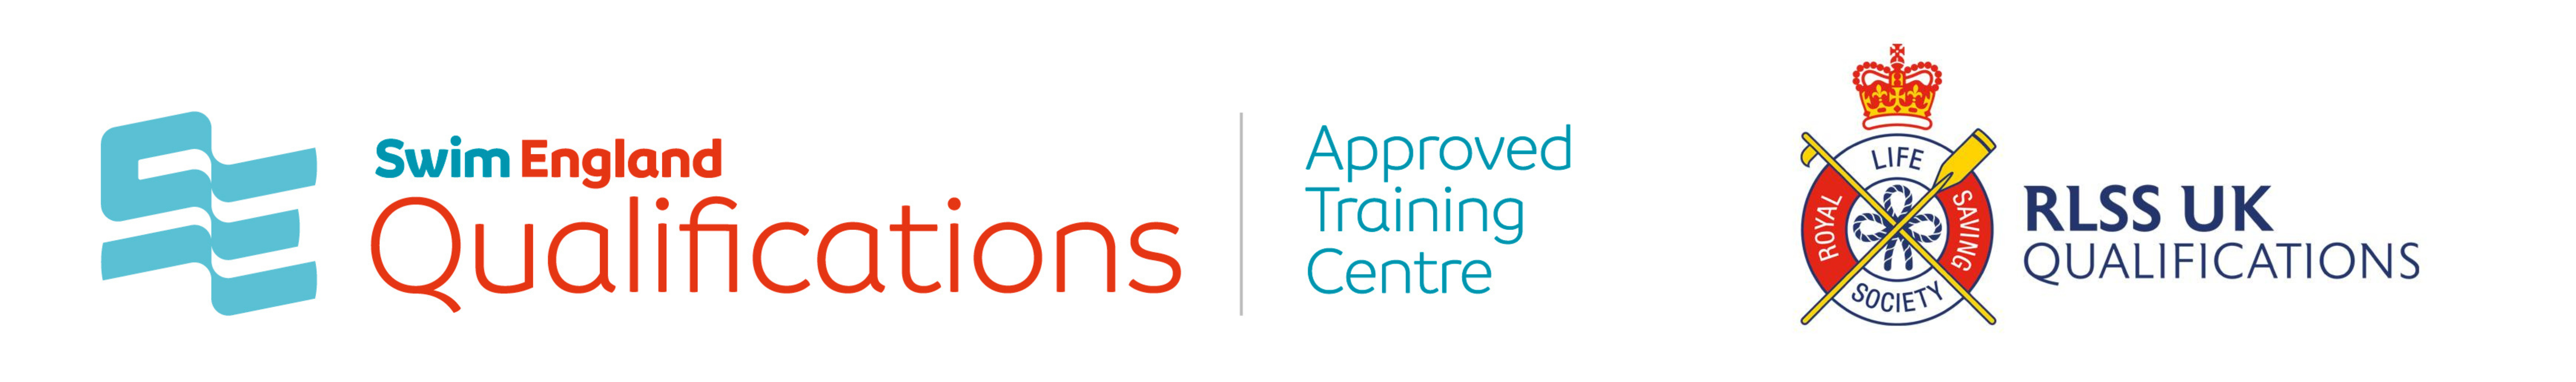 Swim England Qualifications, Approved Training Centre, RLSS UK Qualifications